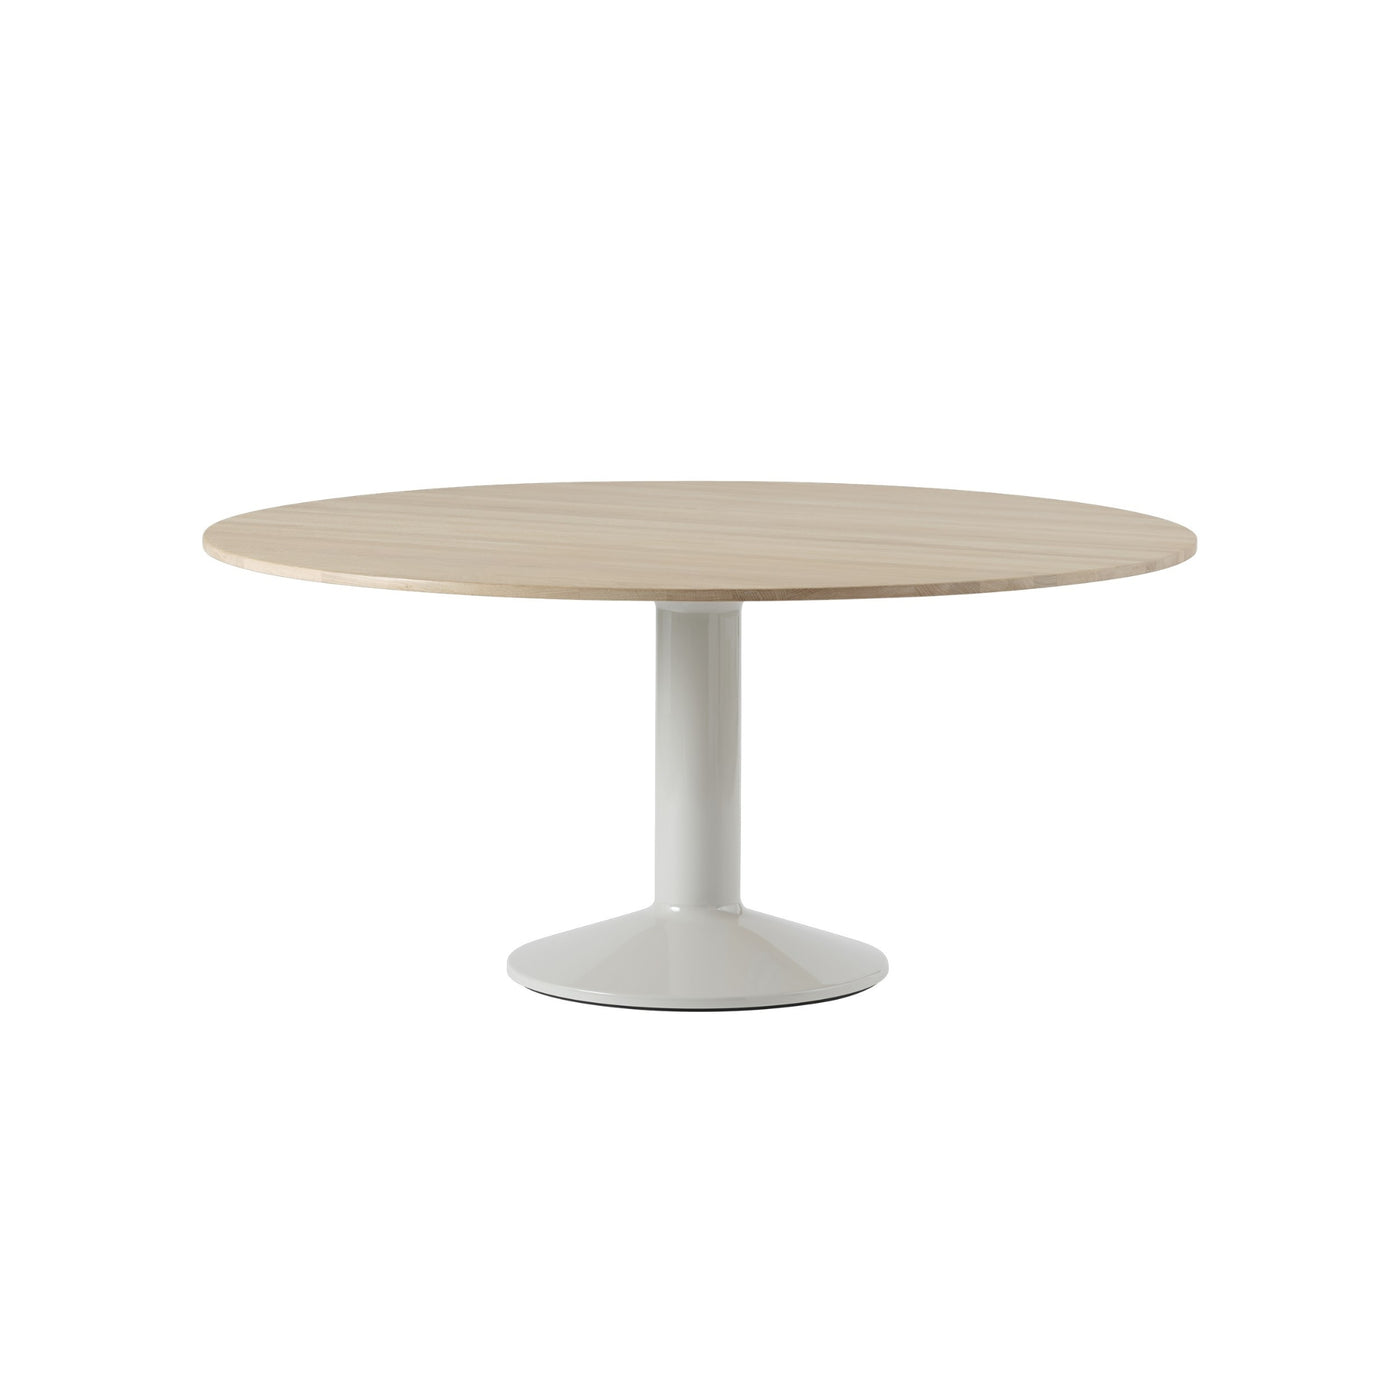 Muuto Midst dining table. Free UK delivery from someday designs. #colour_oiled-oak-grey